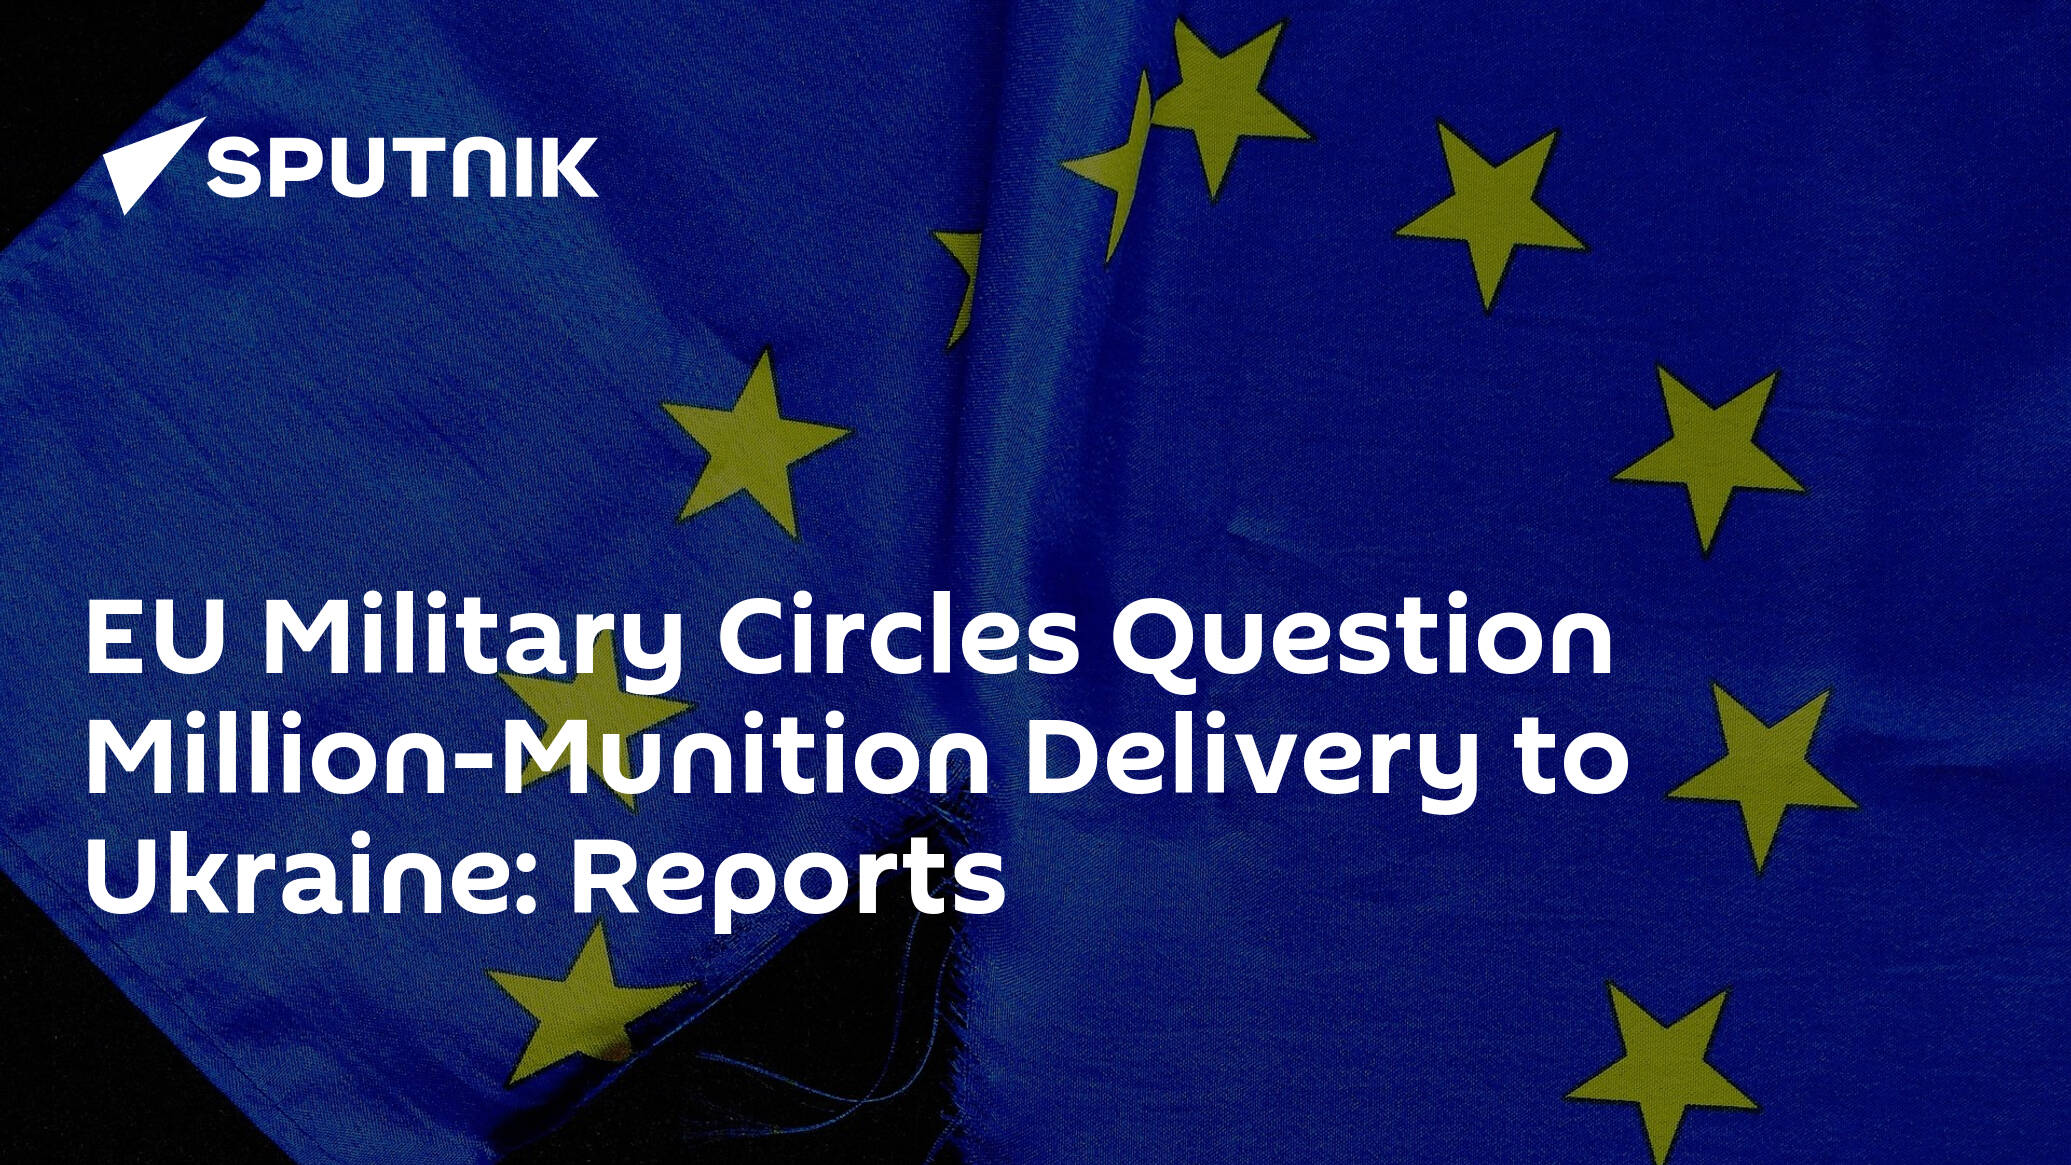 EU Military Circles Doubting Feasibility of Delivering 1Mln Munitions to Ukraine, Media Reports